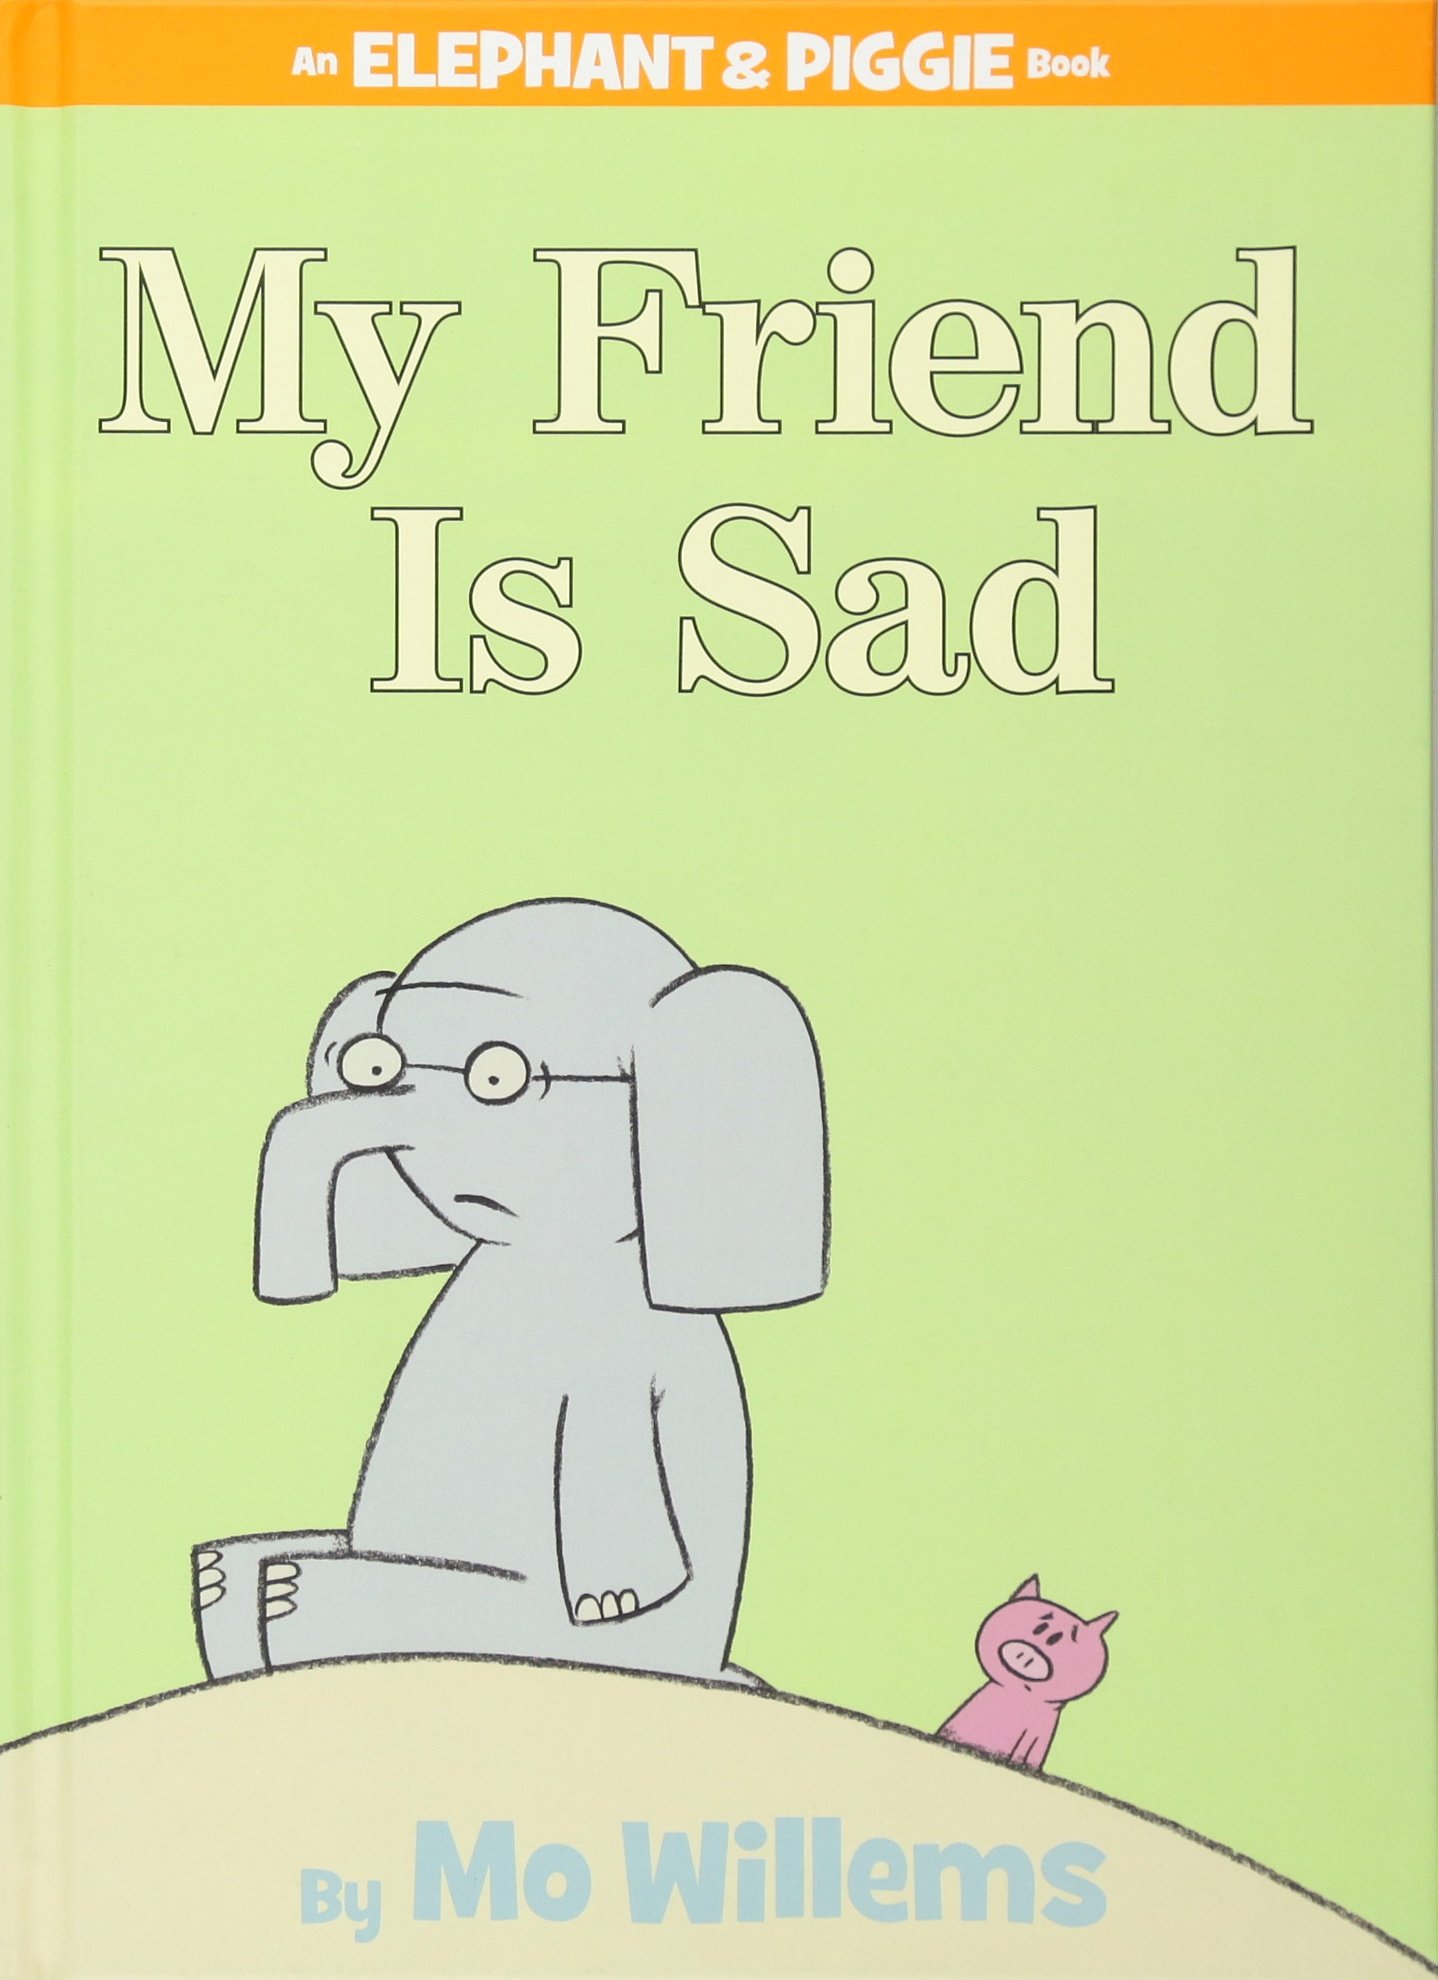 Elephants books. Elephant and Piggie. Sad friend. Pete the Cat, Elephant and Piggy by mo Willems. Color and create your ownstory with elephand and Piggle fom mo Willems.